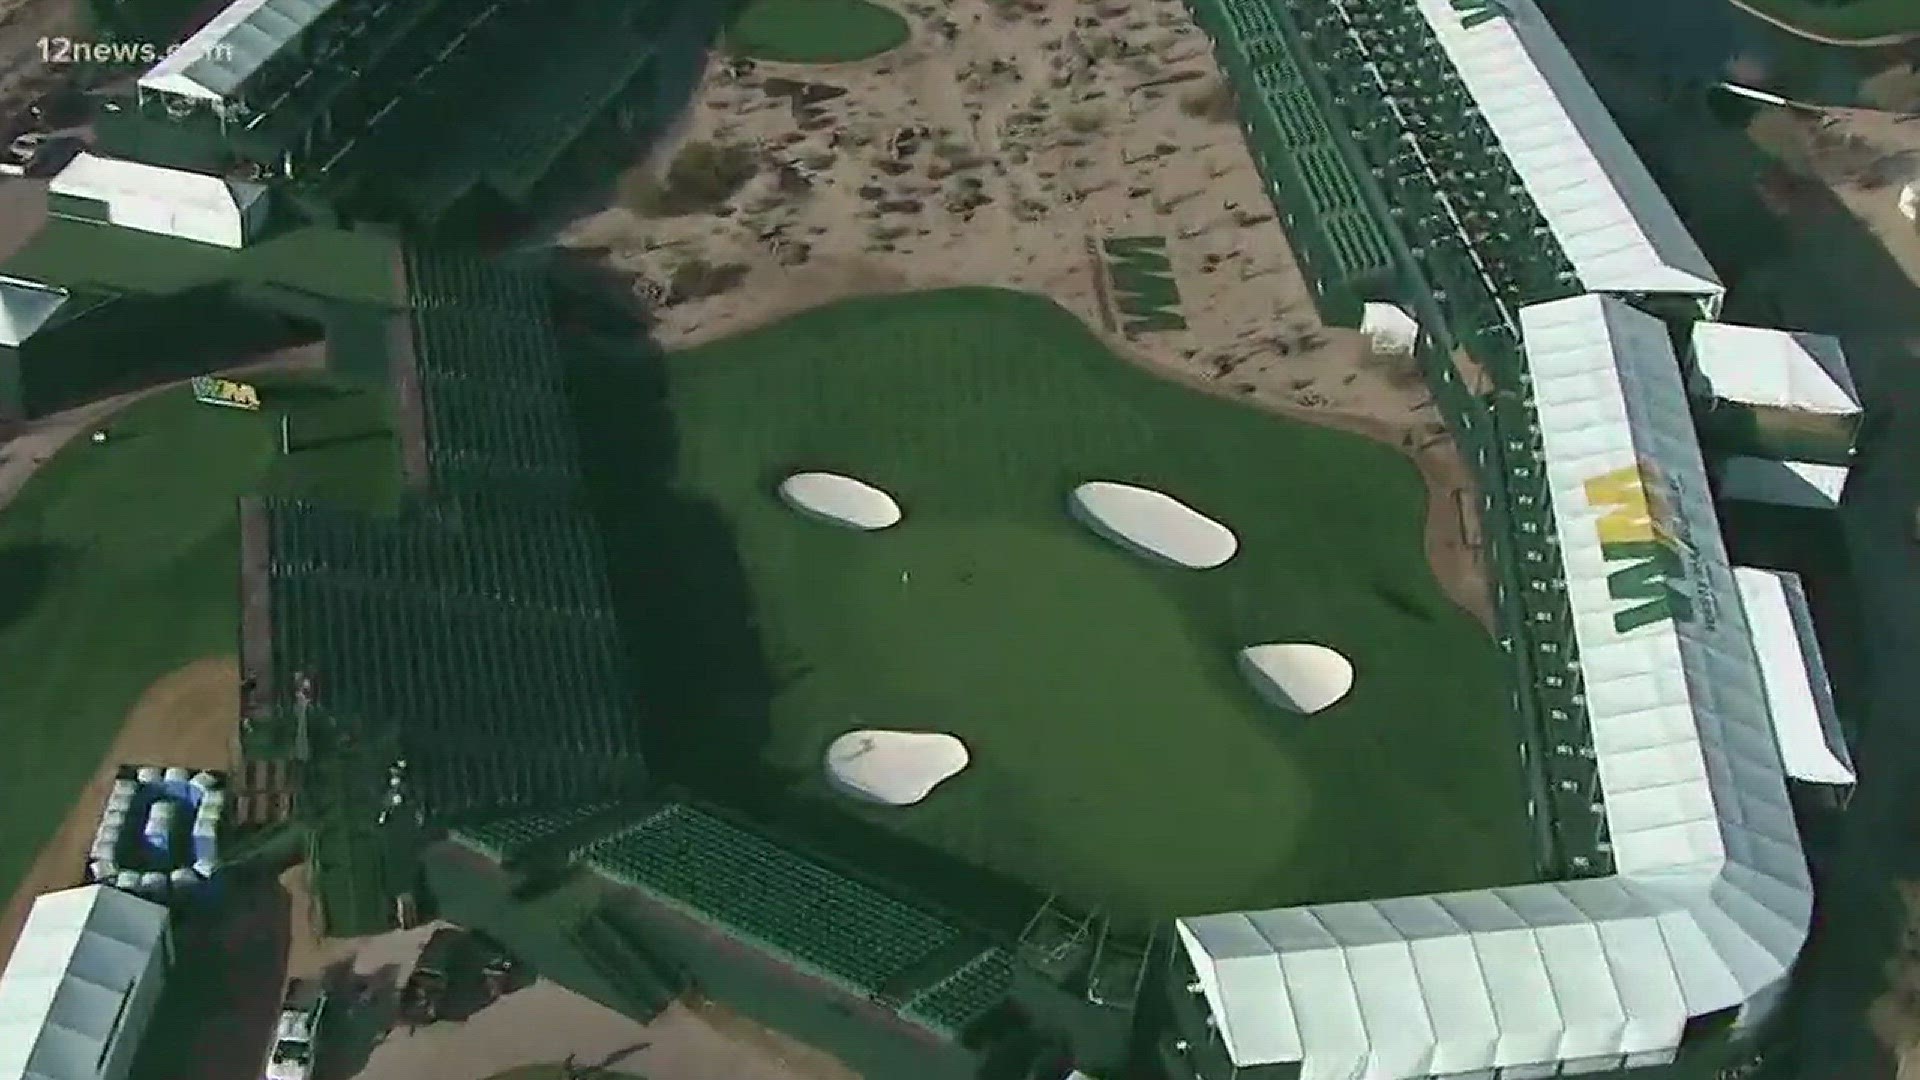 Phoenix Open 17th hole getting new clubhouse, bleachers, lounge and bar 12news